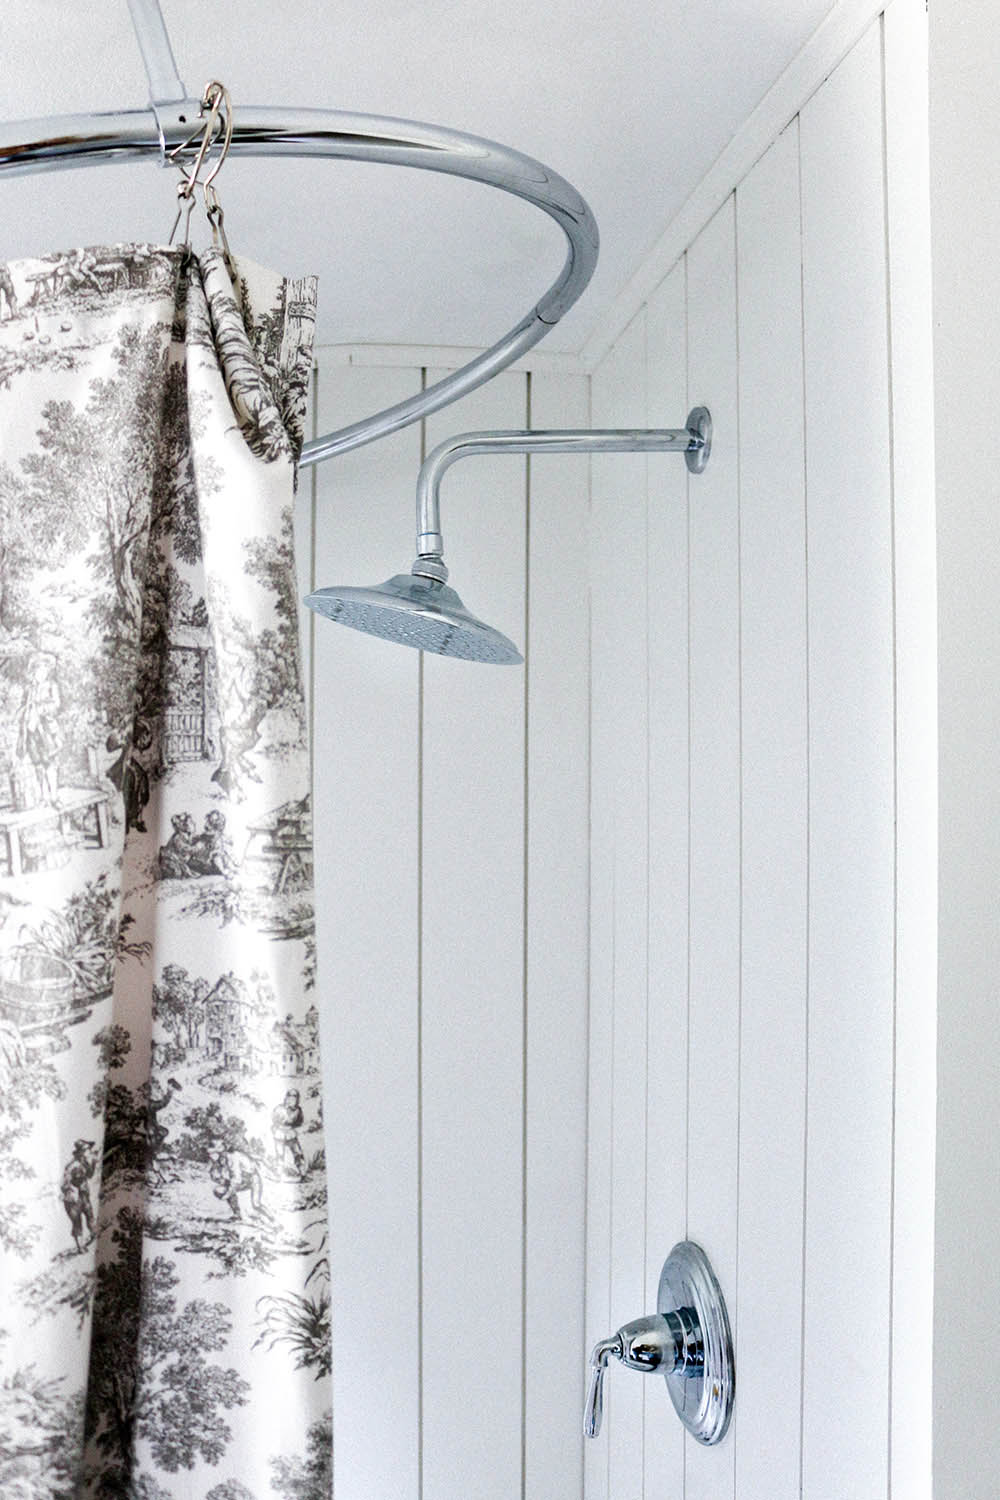 A chrome shower fixture installed on a white vertical shiplap wall.